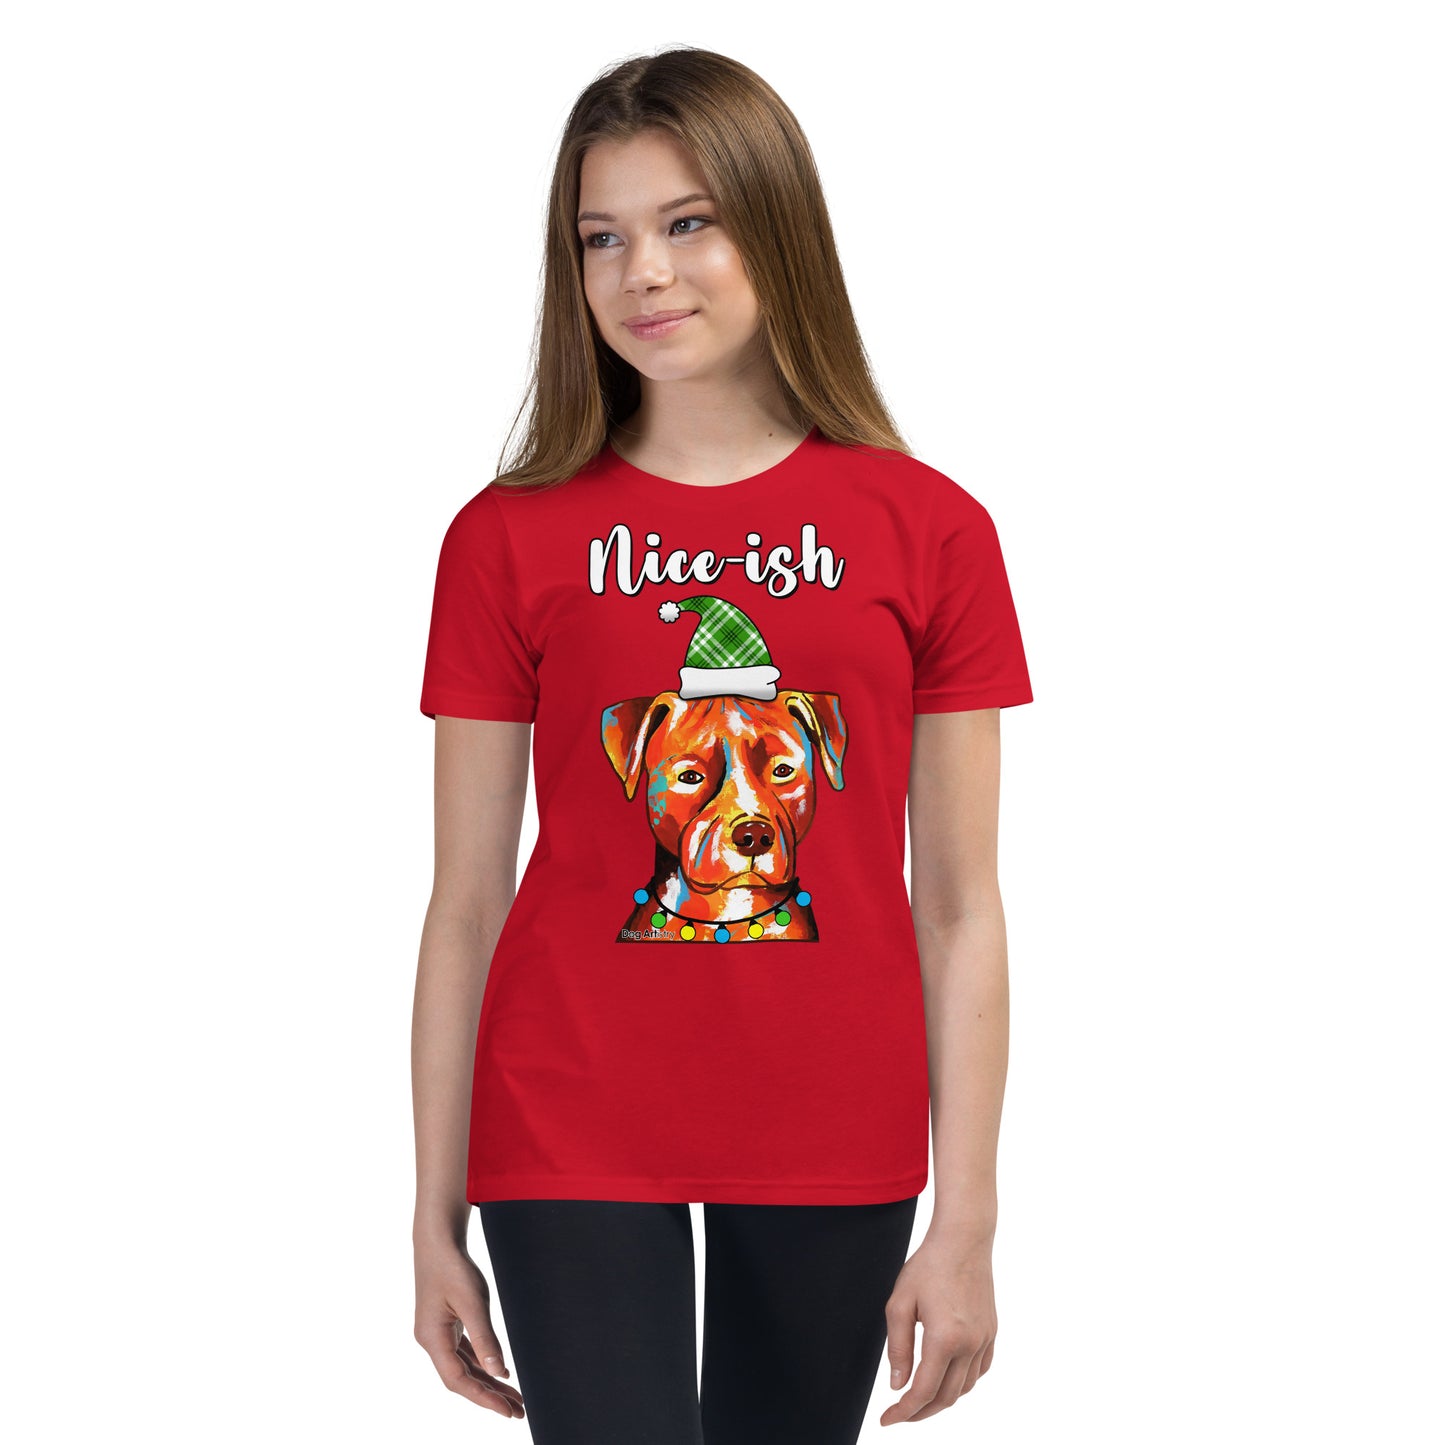 Nice-Ish Amstaff - Pit bull Holiday youth t-shirt red by Dog Artistry.